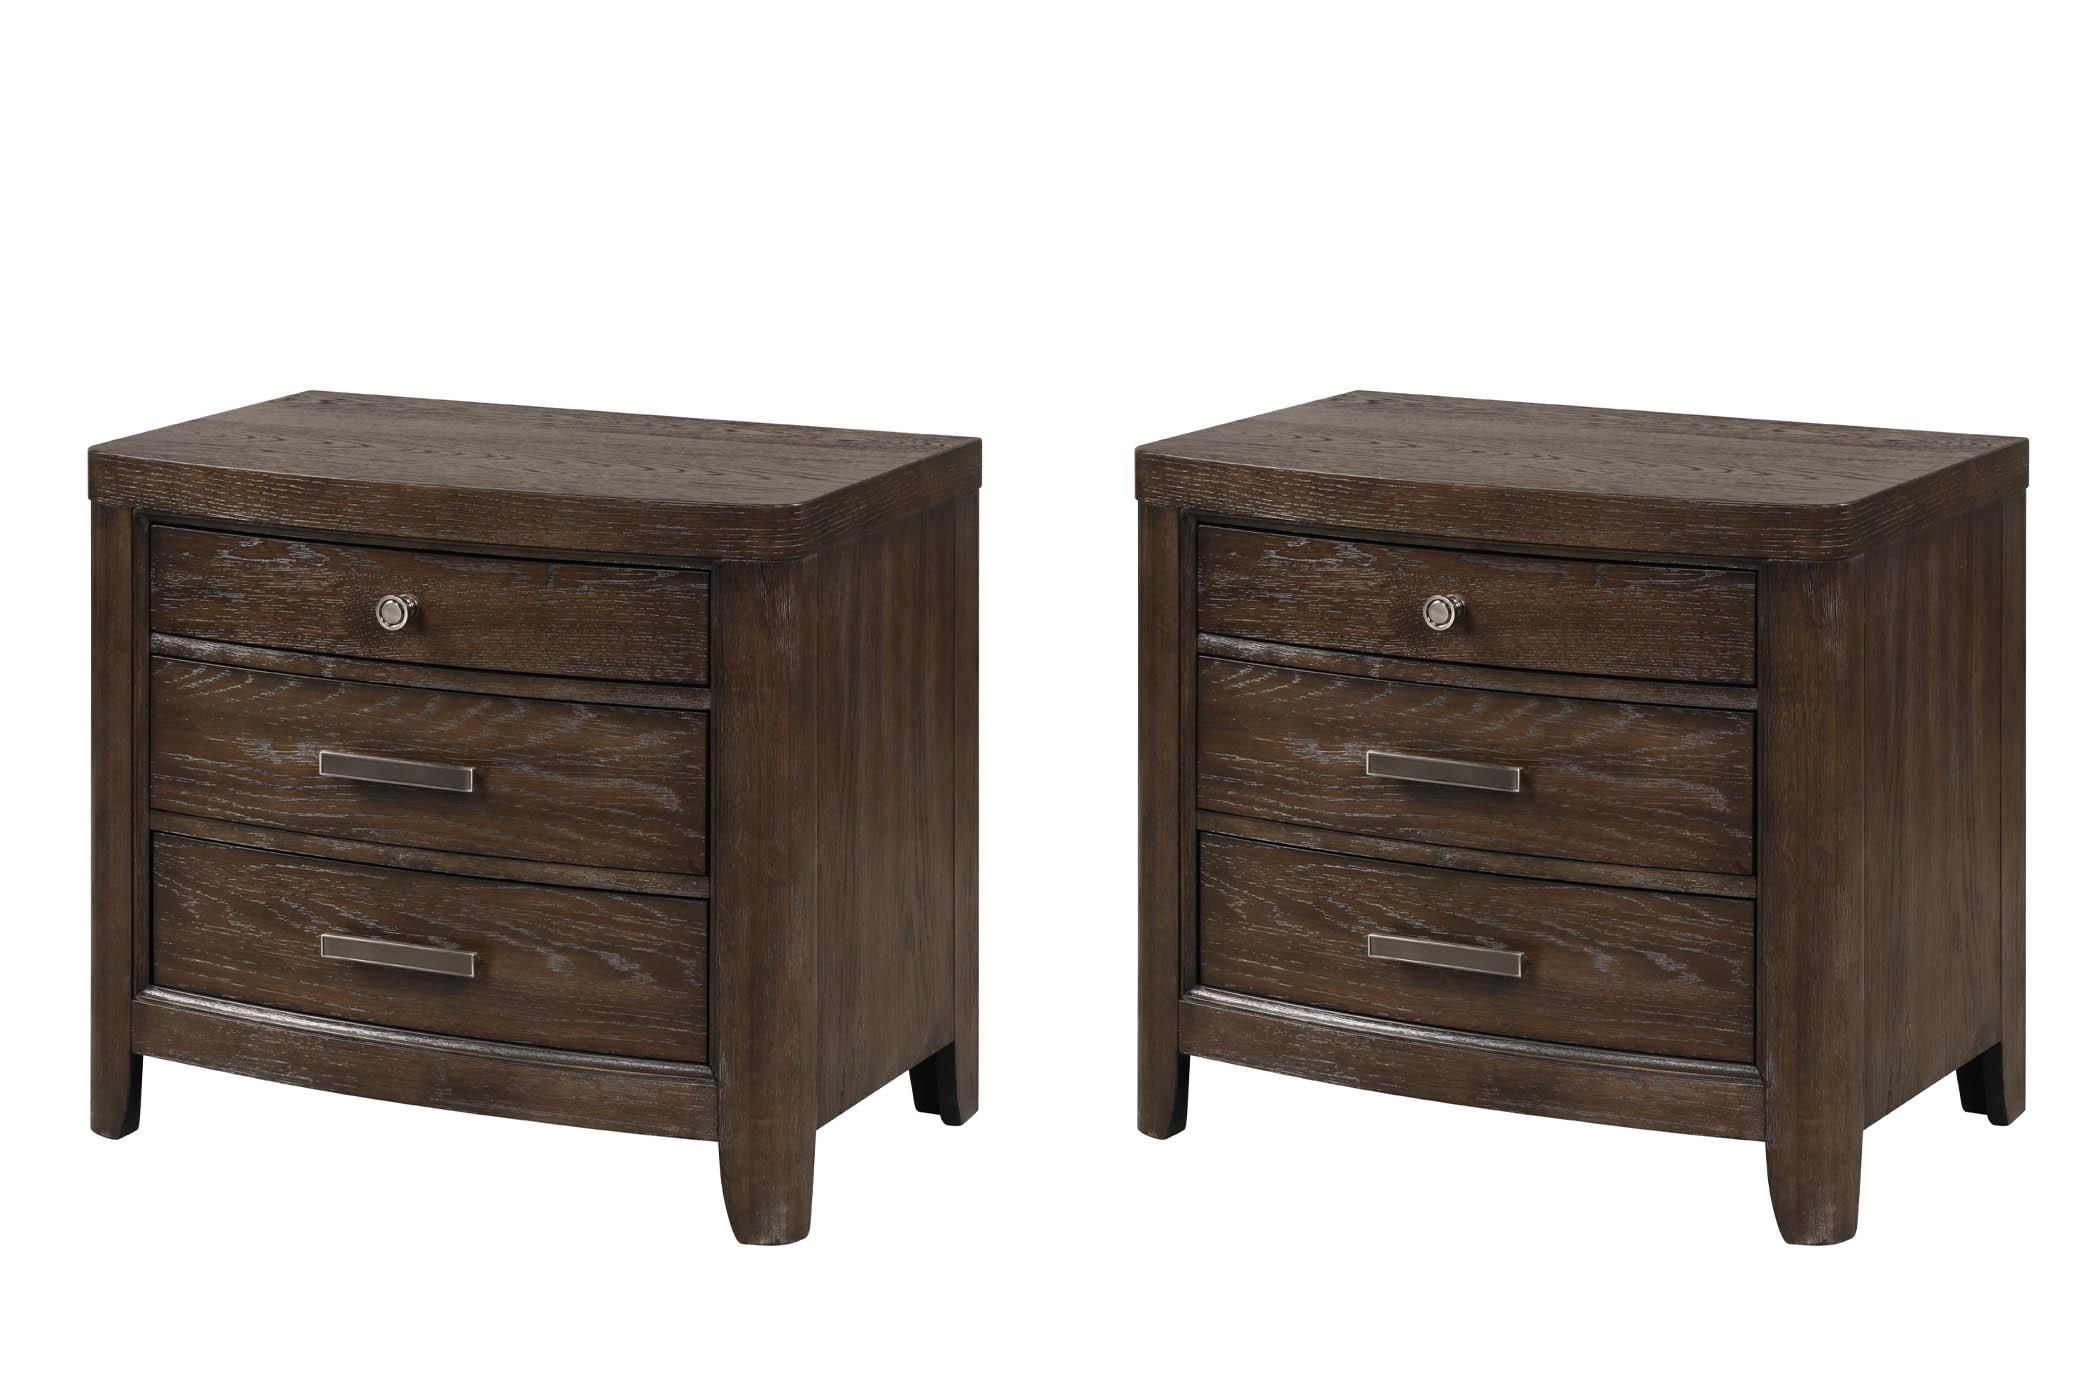 Classic, Transitional Nightstand Set FULTON 1720-120-Set 1720-120-Set in Brown 